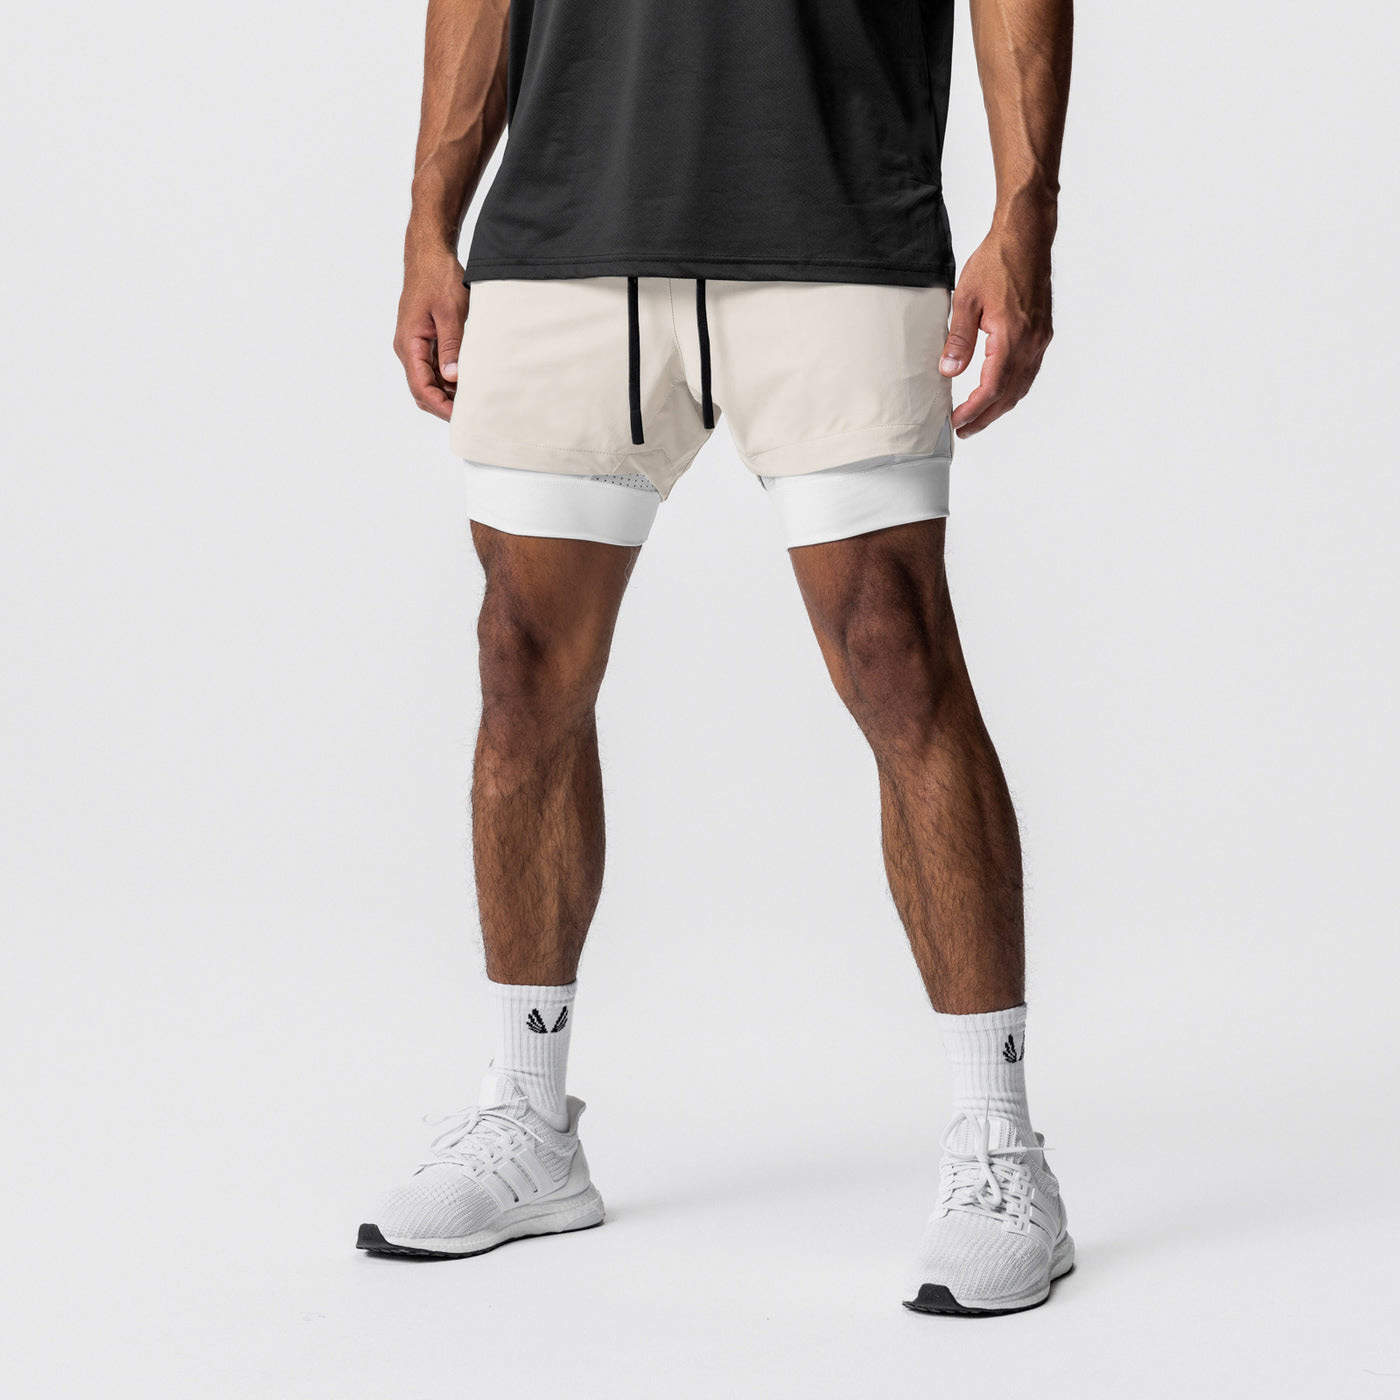 Men's Double-Layered Fitness Shorts for Workouts